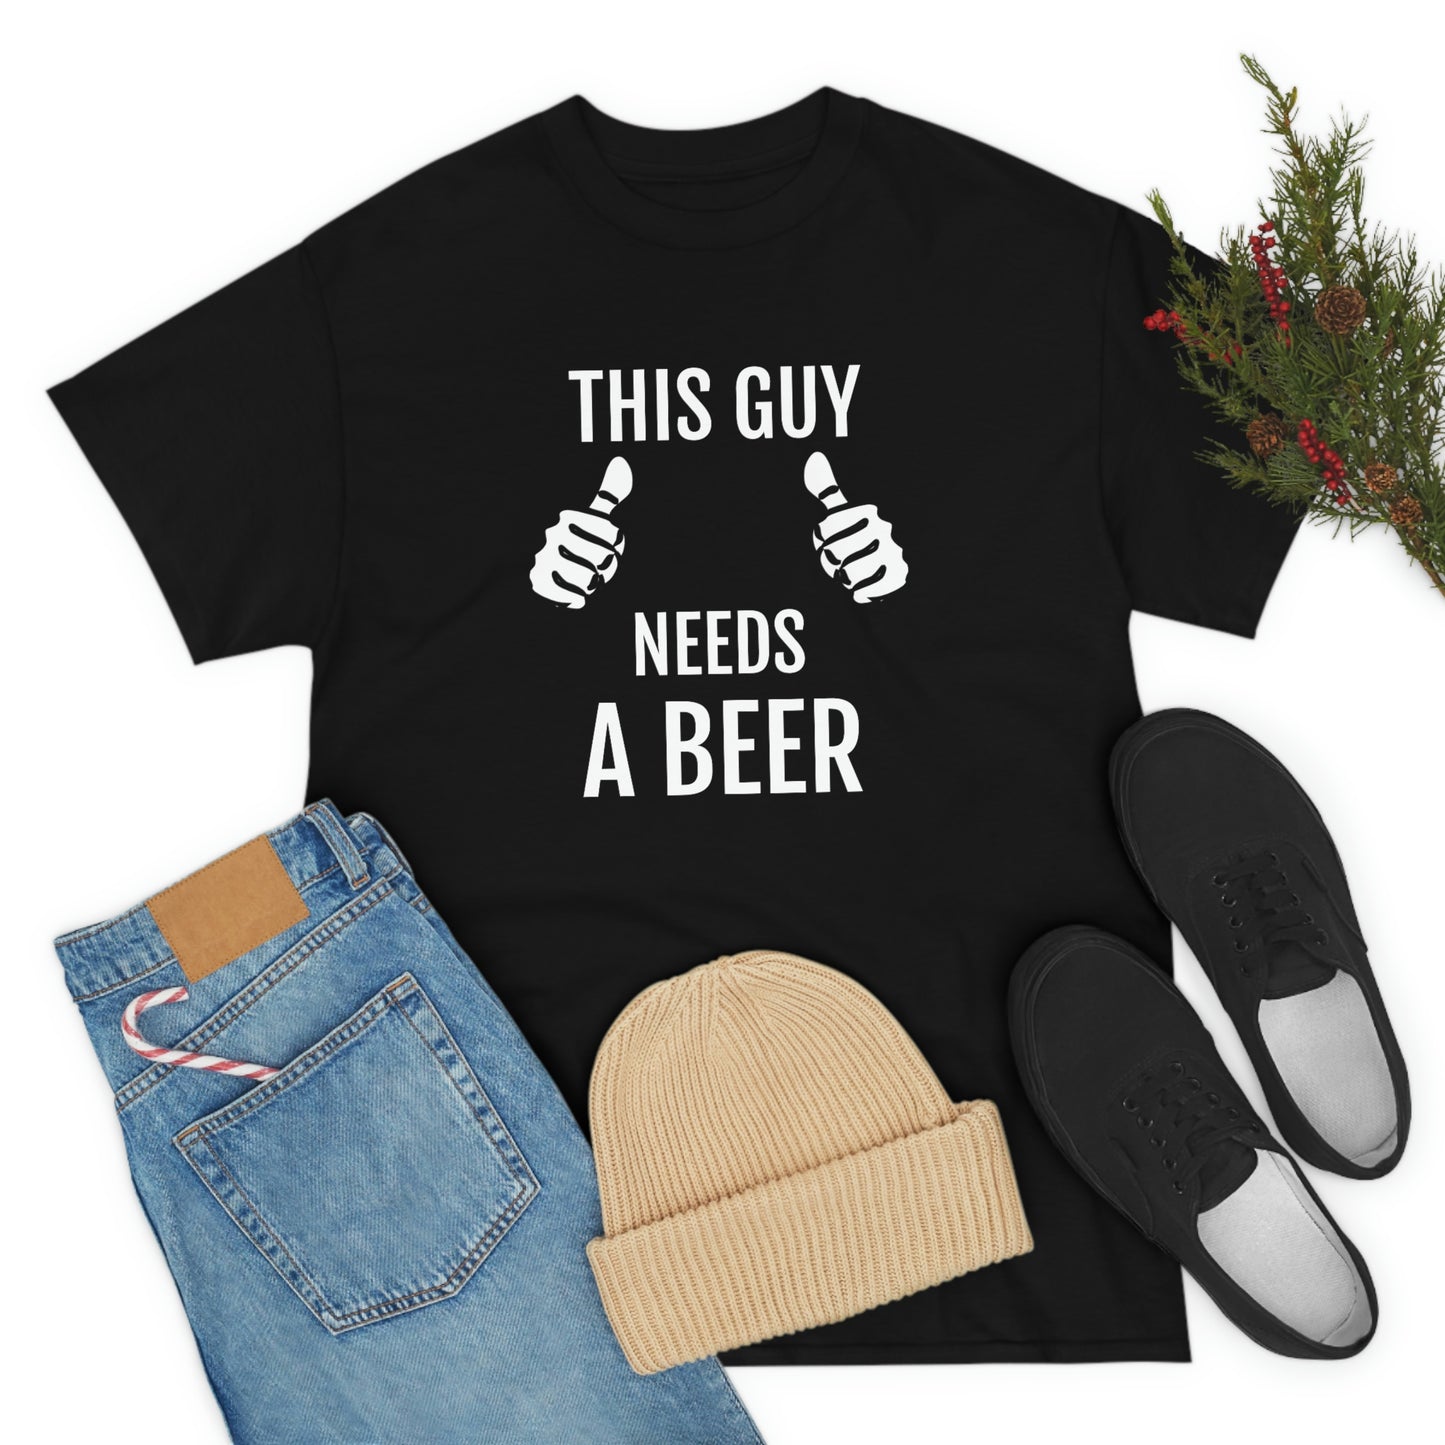 THIS GUY NEEDS A BEER T-SHIRT